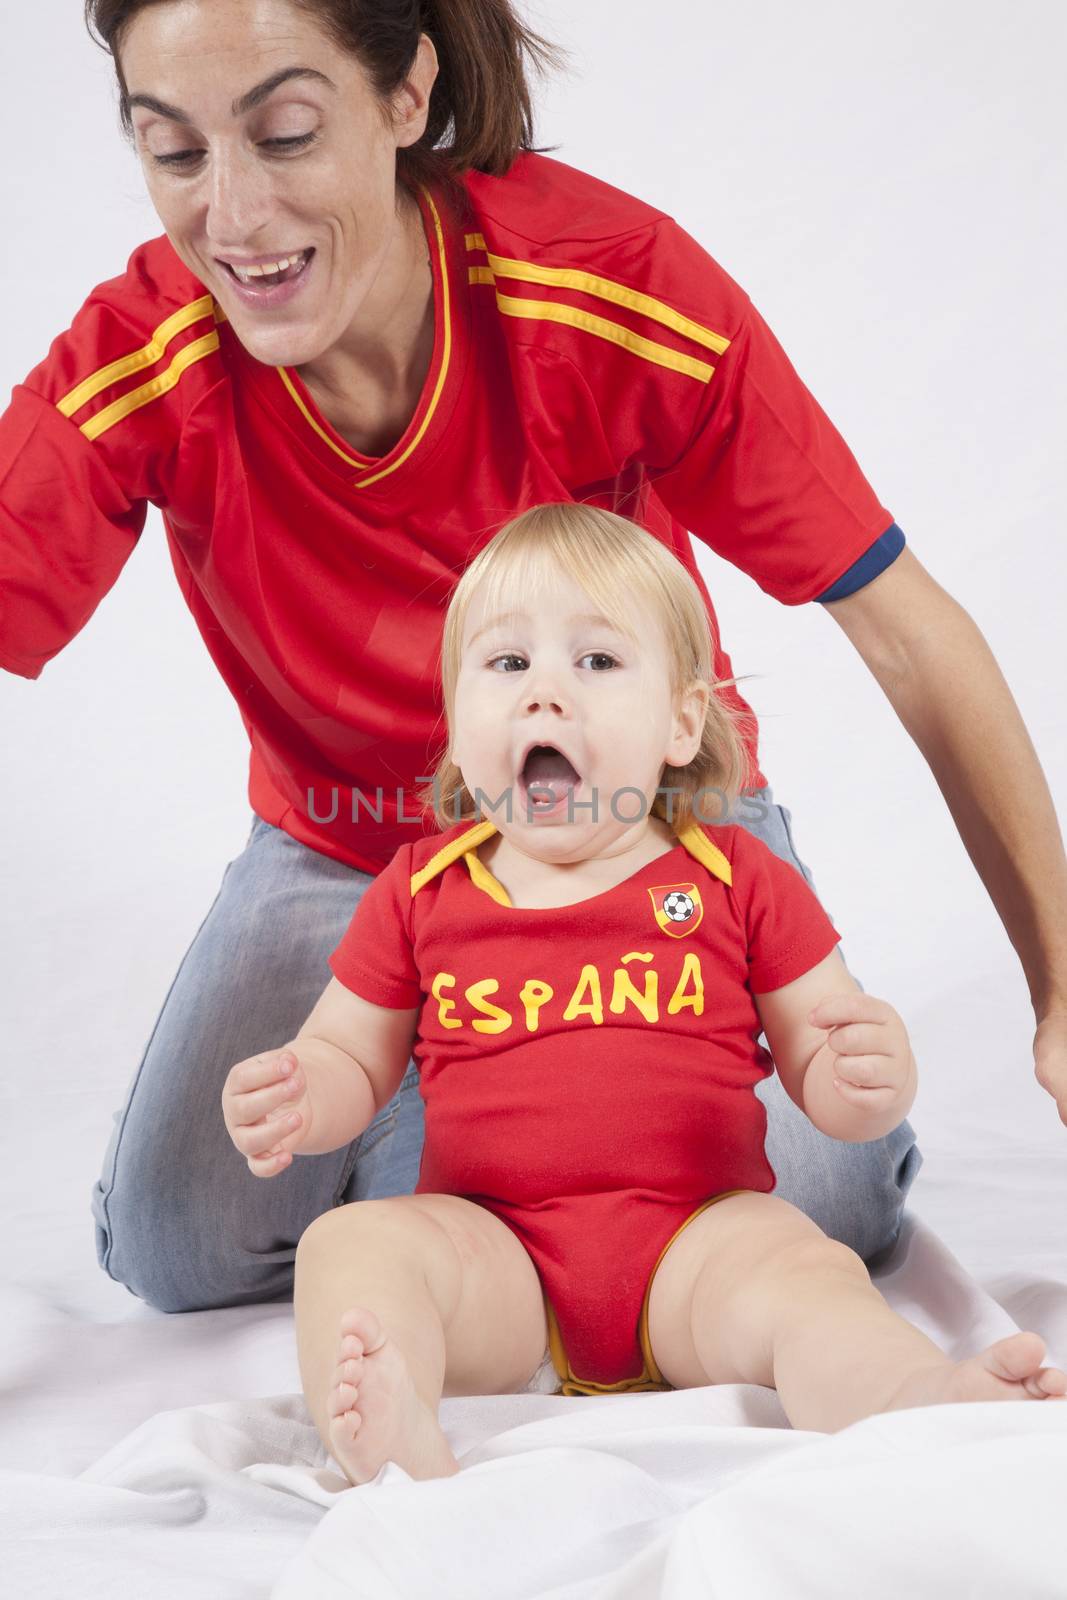 celebrating blonde baby sixteen month old with red shirt of Spanish soccer team and mother